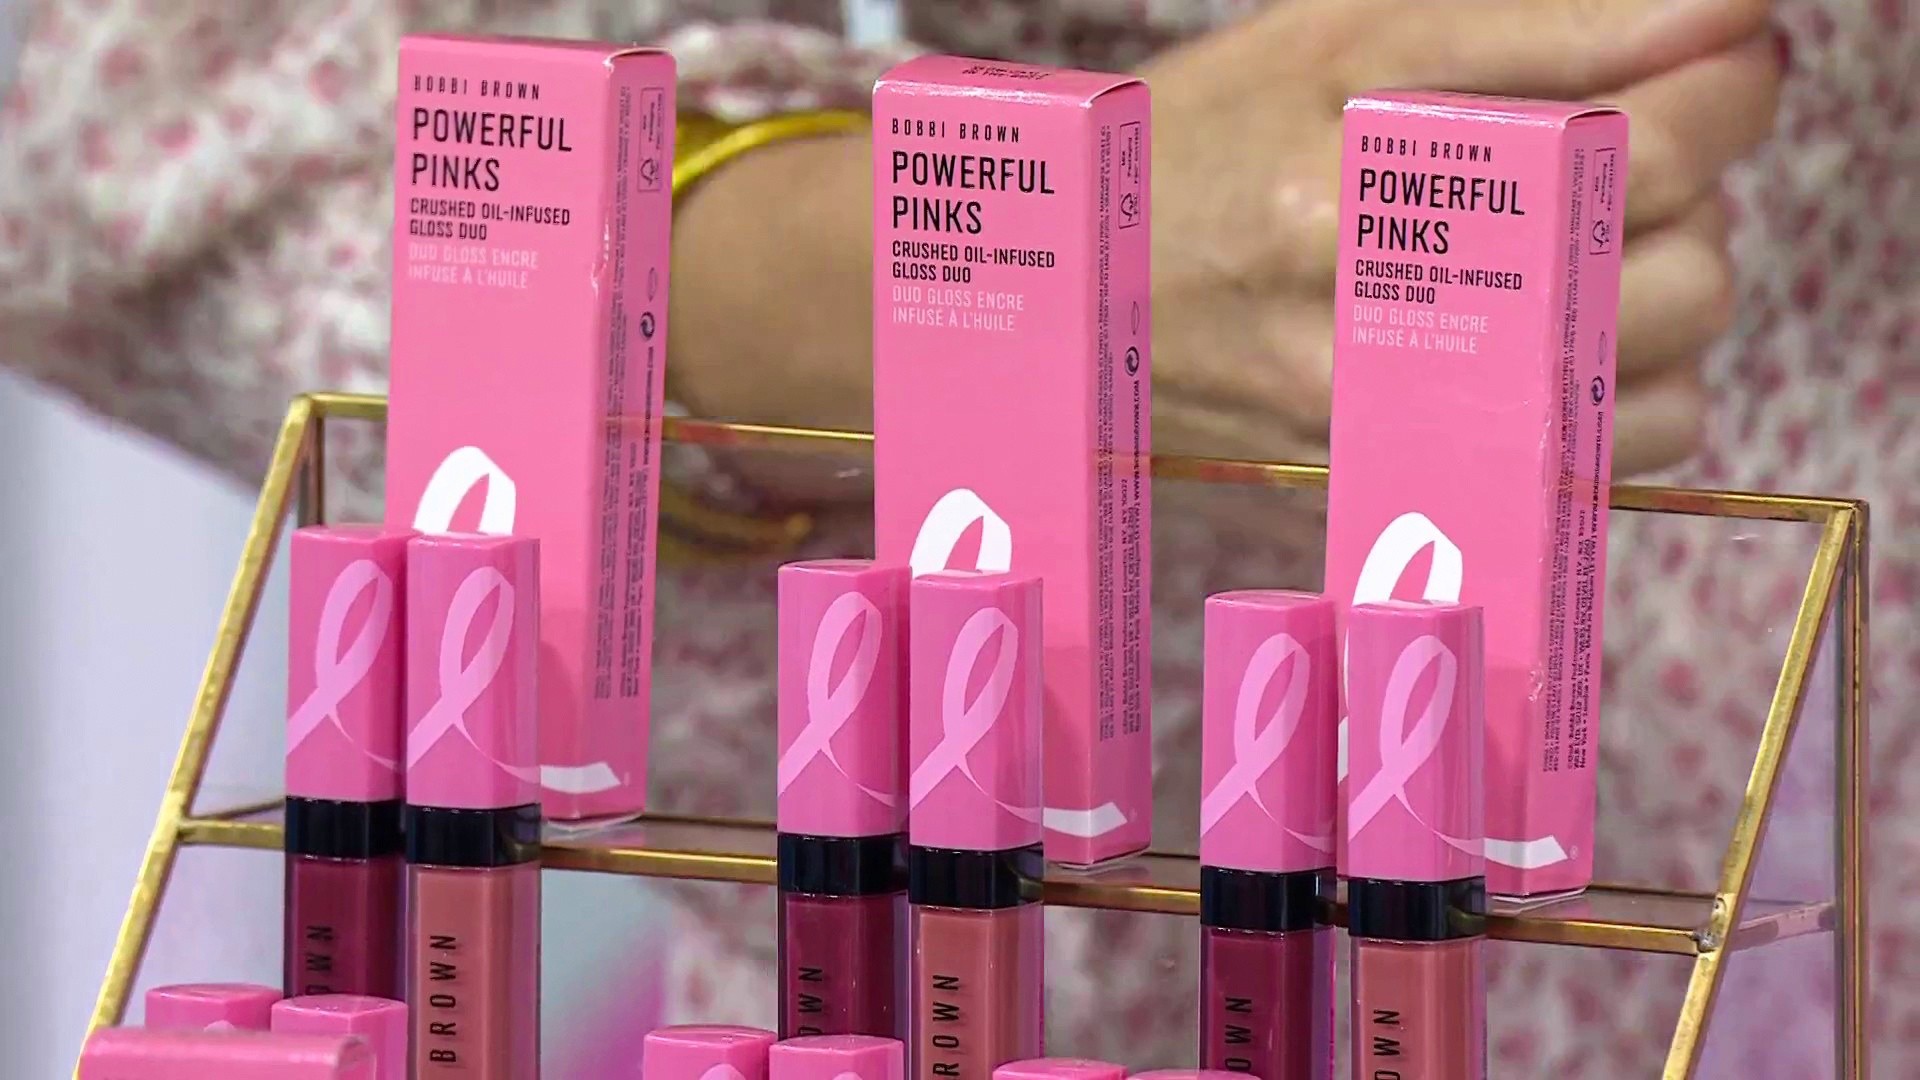 Prince George's Co. goes pink' Local store helps breast cancer